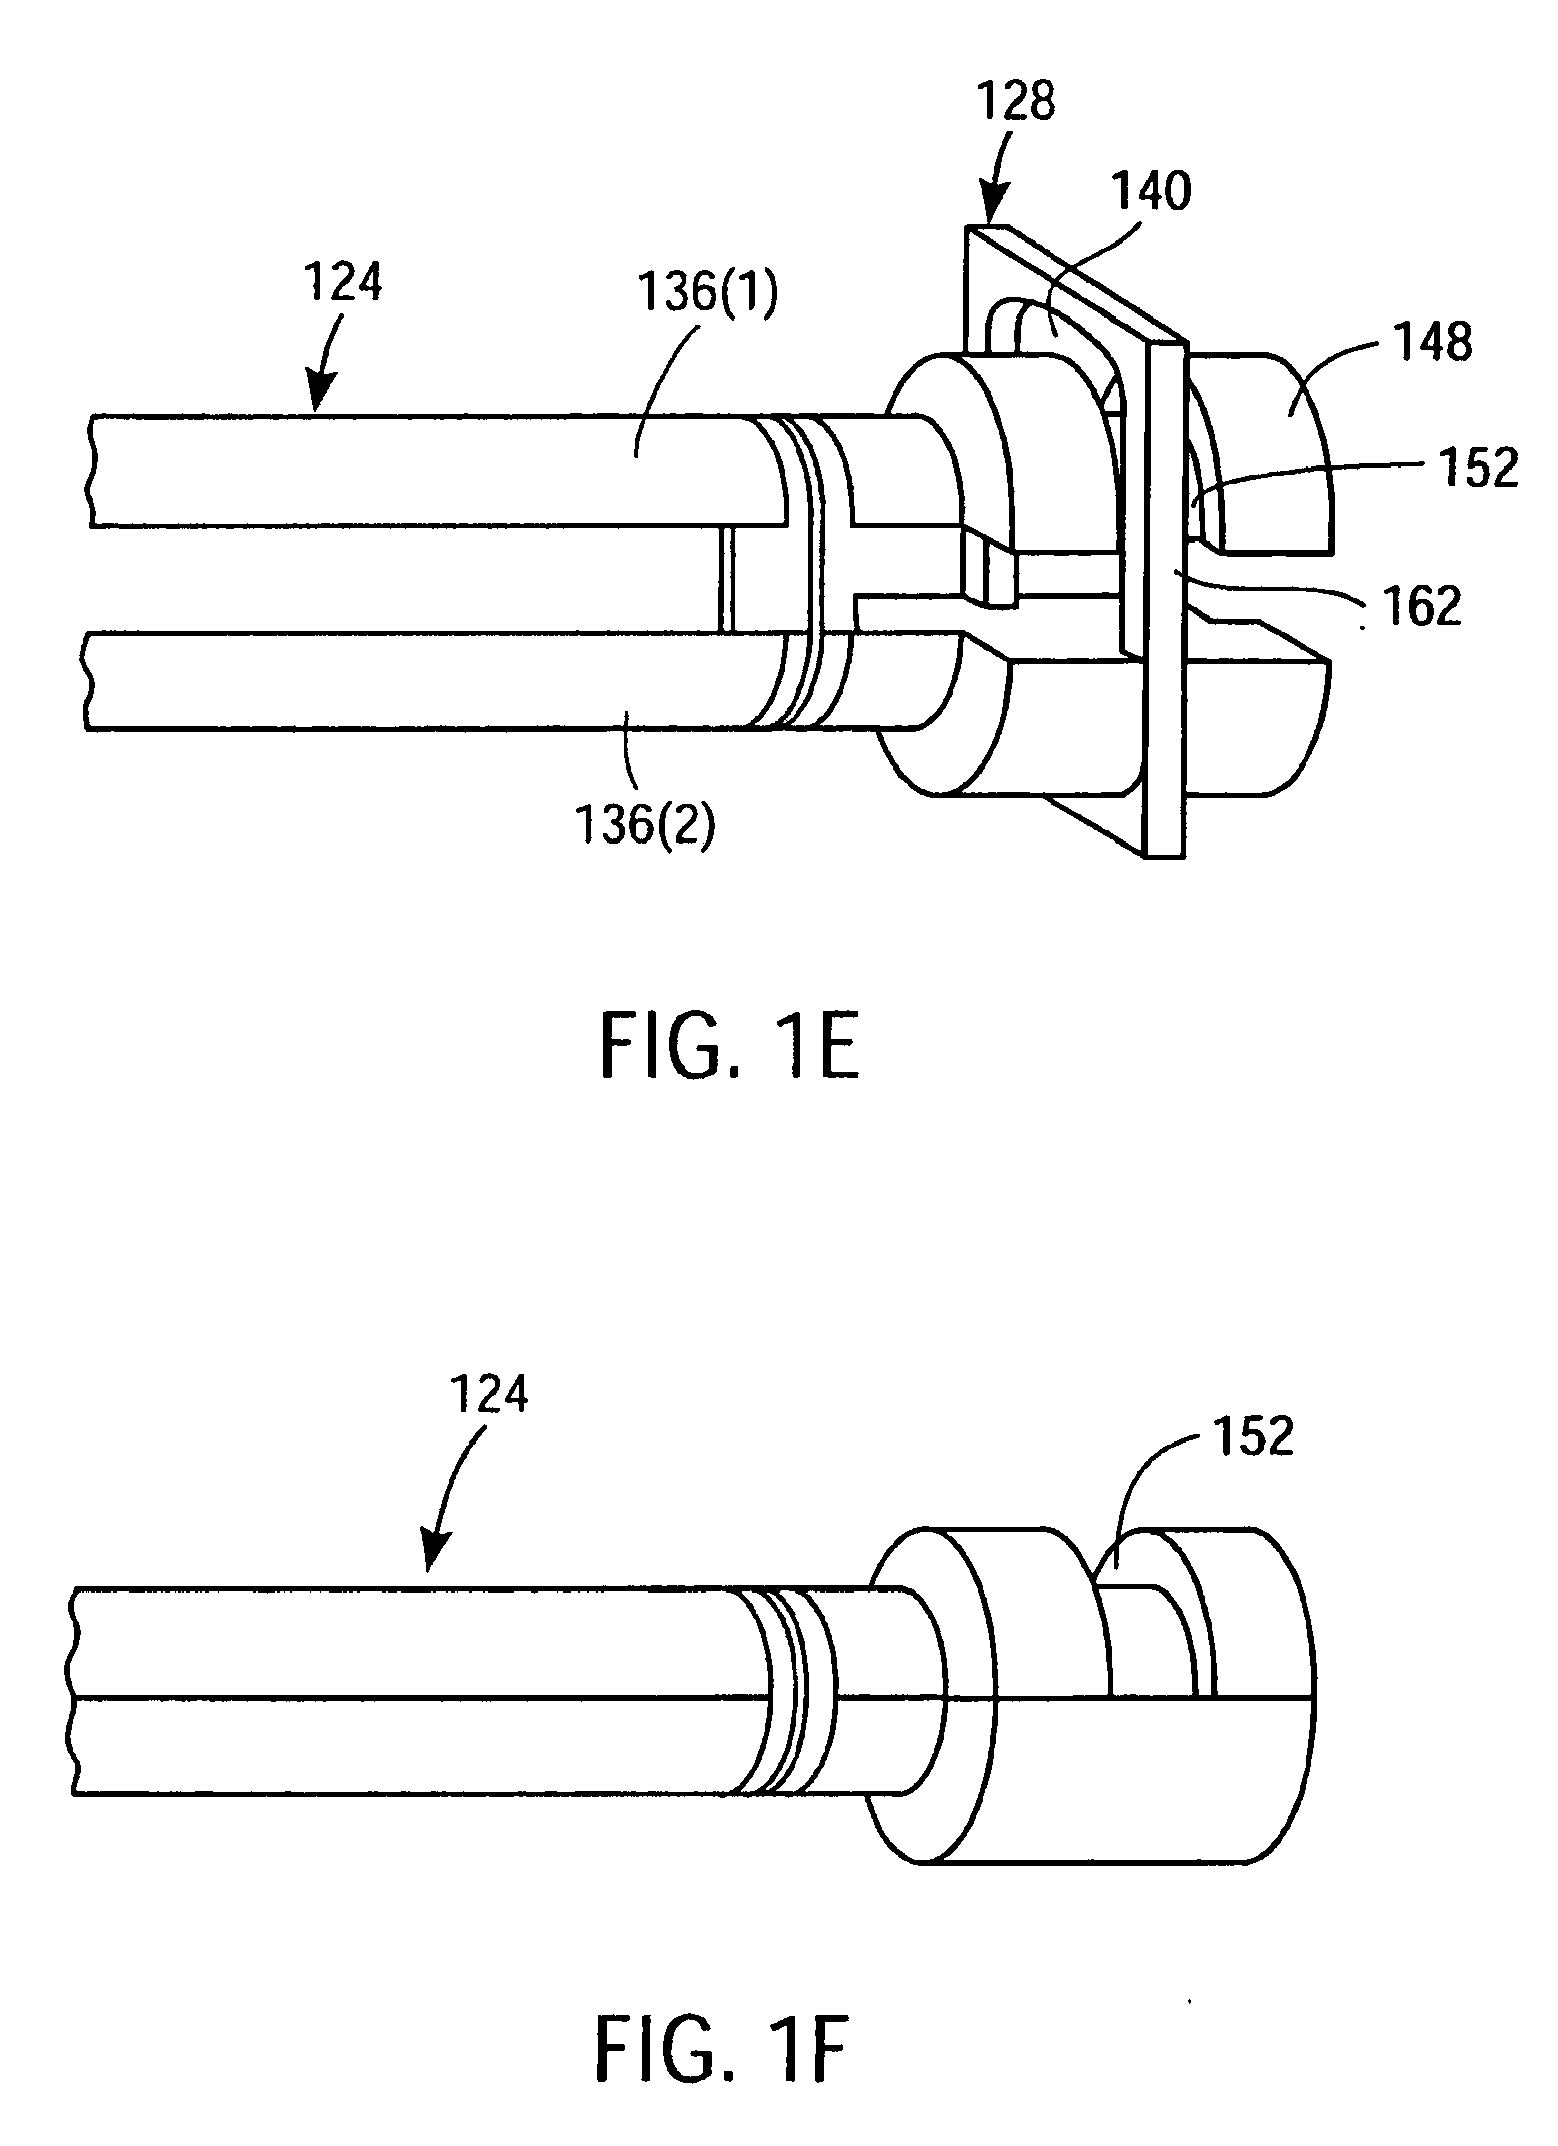 Apparatus and Method for Endoscopic Surgical Procedures